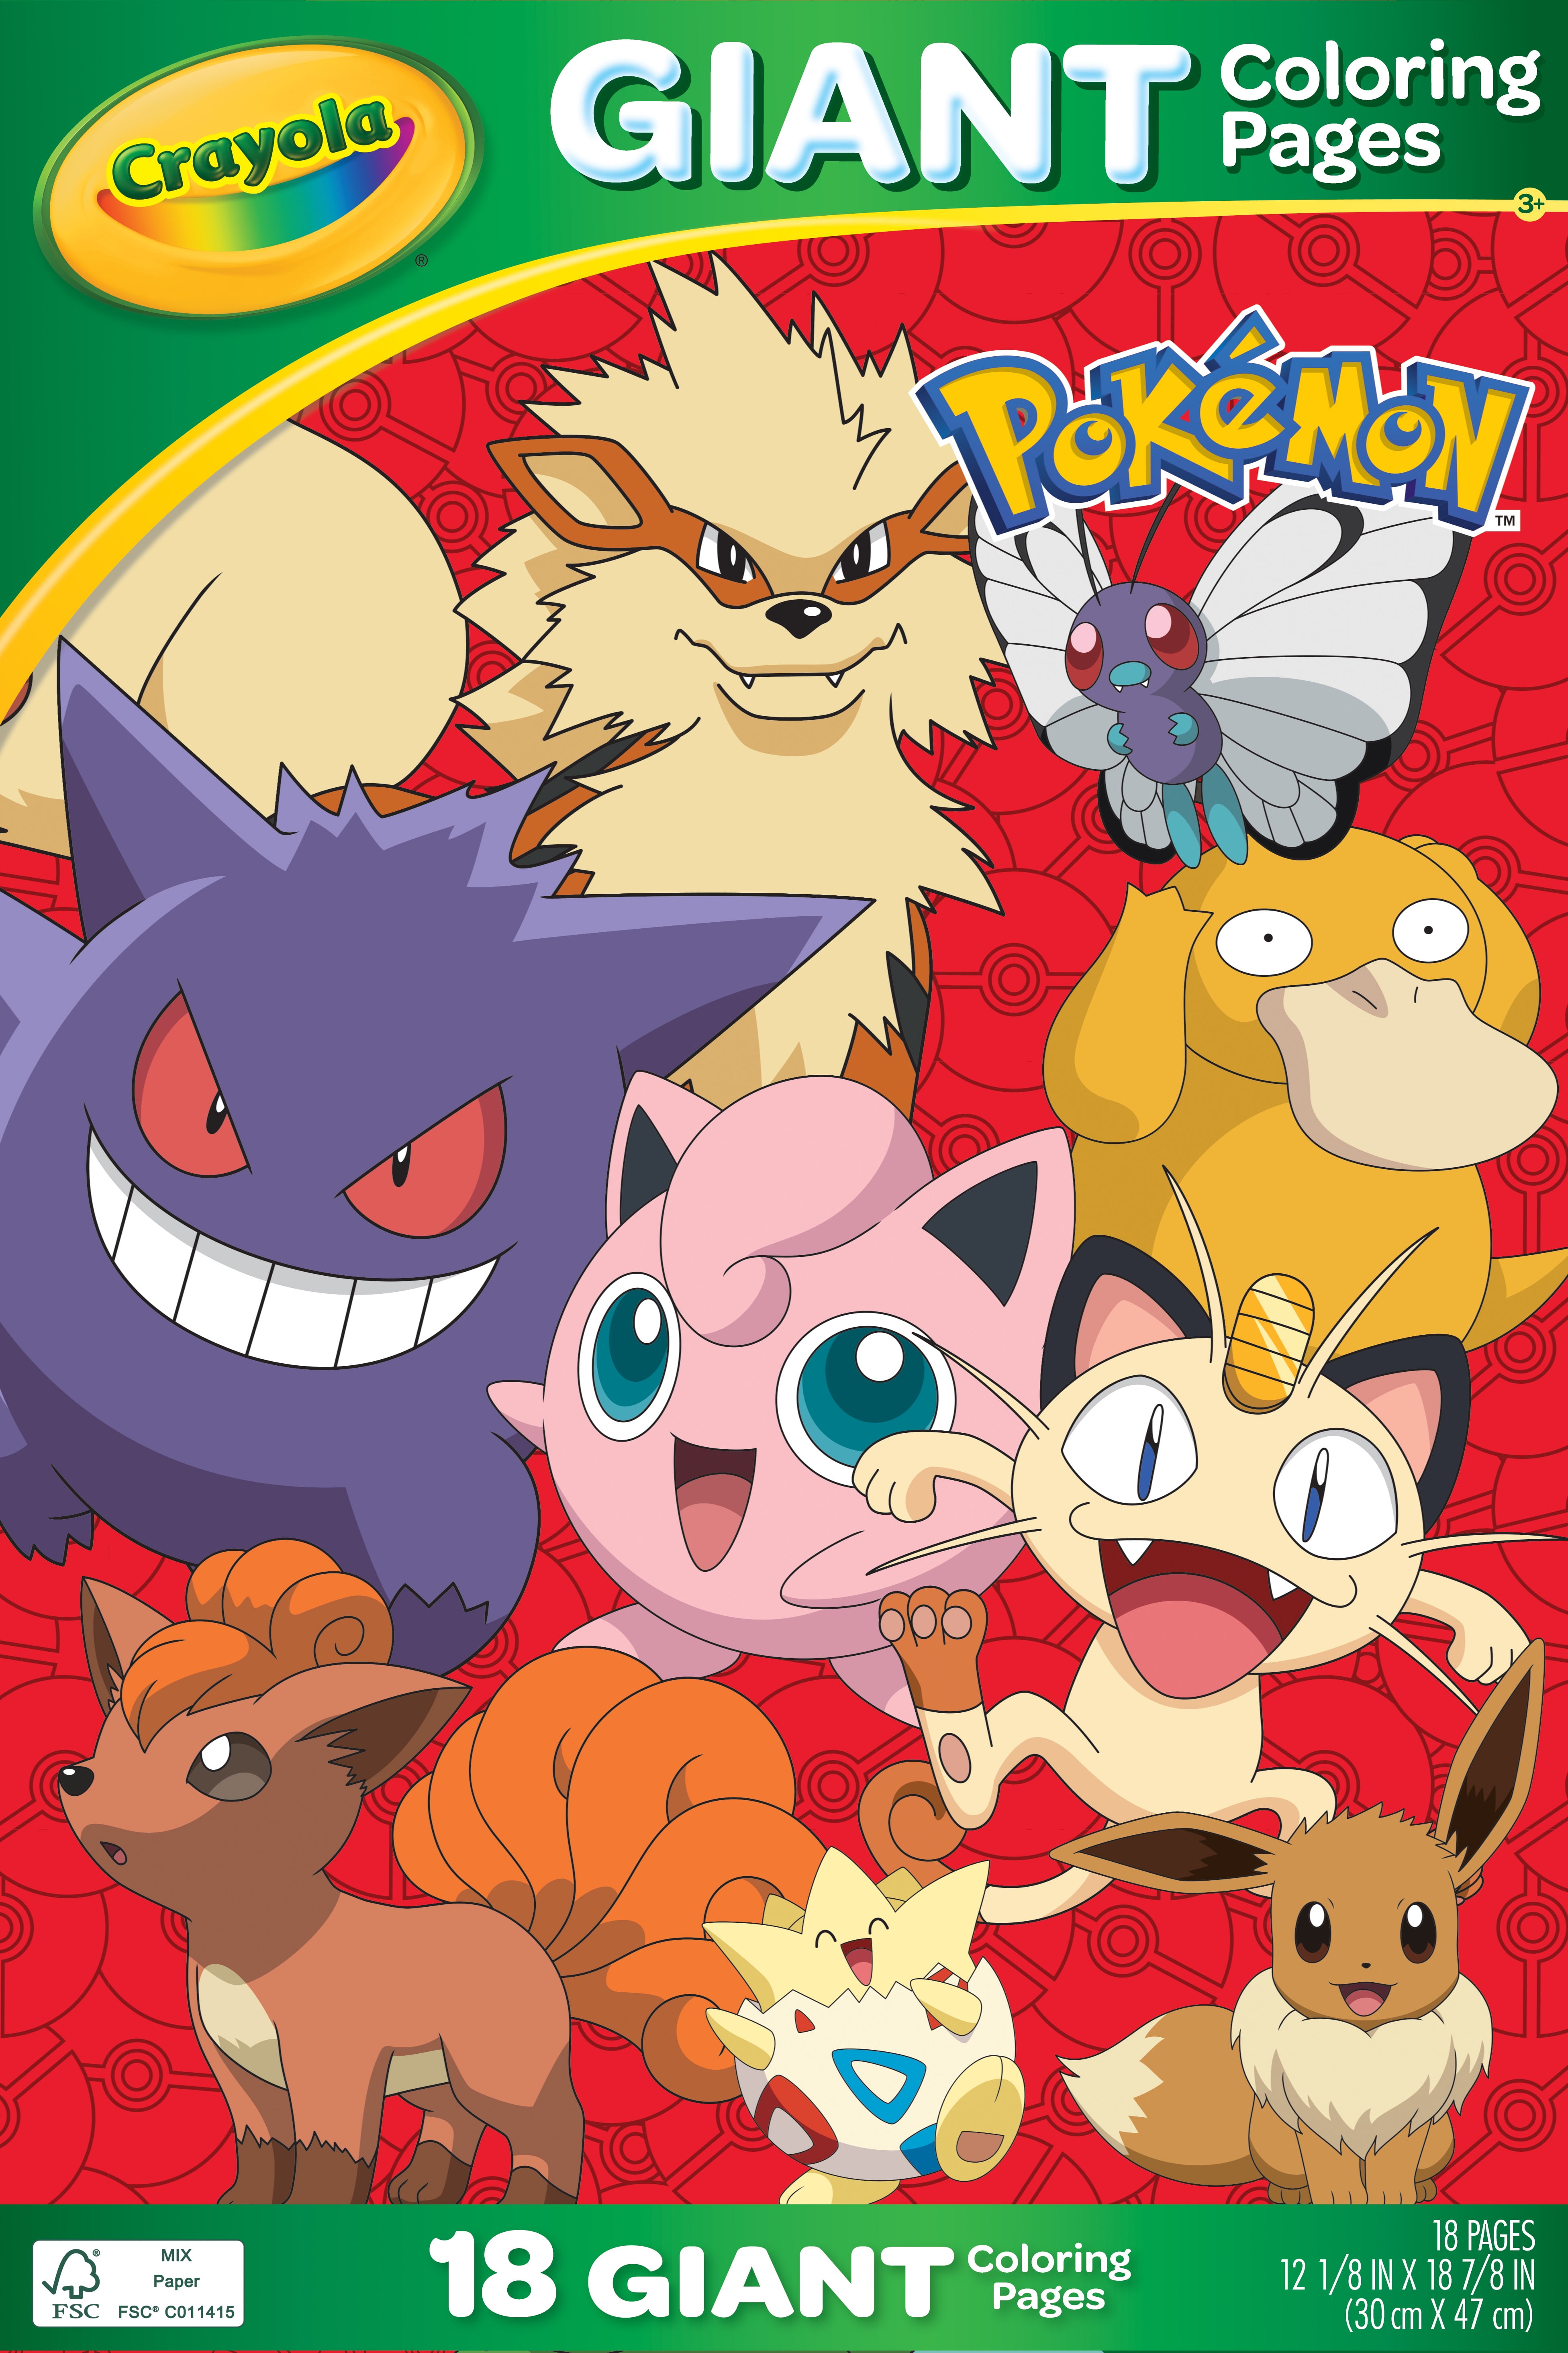 Crayola pokemon giant coloring pages coloring pages gifts for kids ages